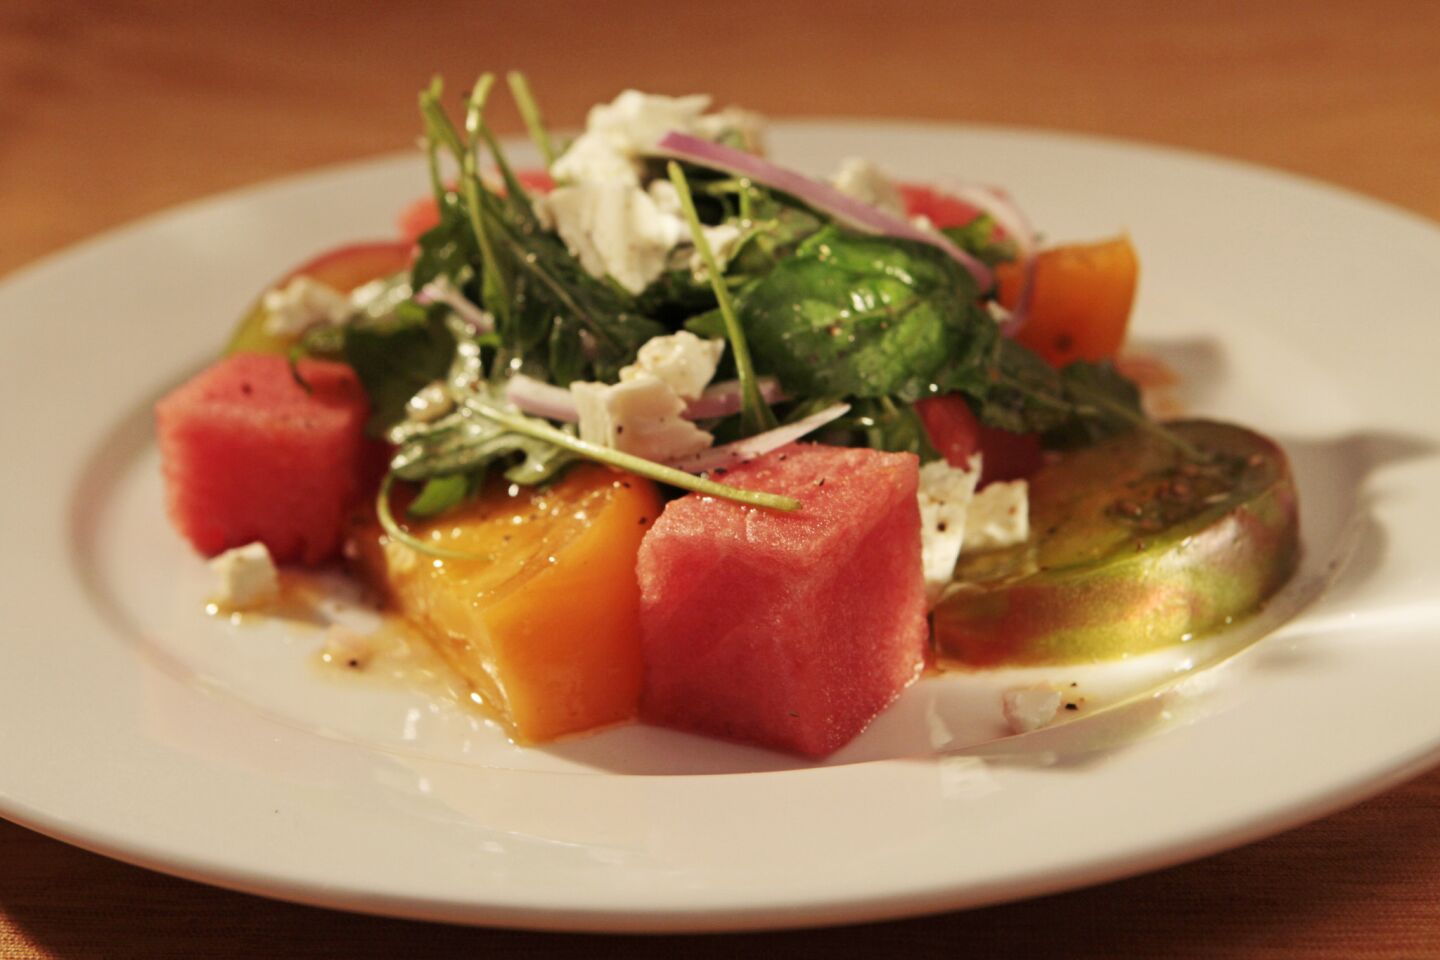 Heirloom tomatoes and watermelon work well together.